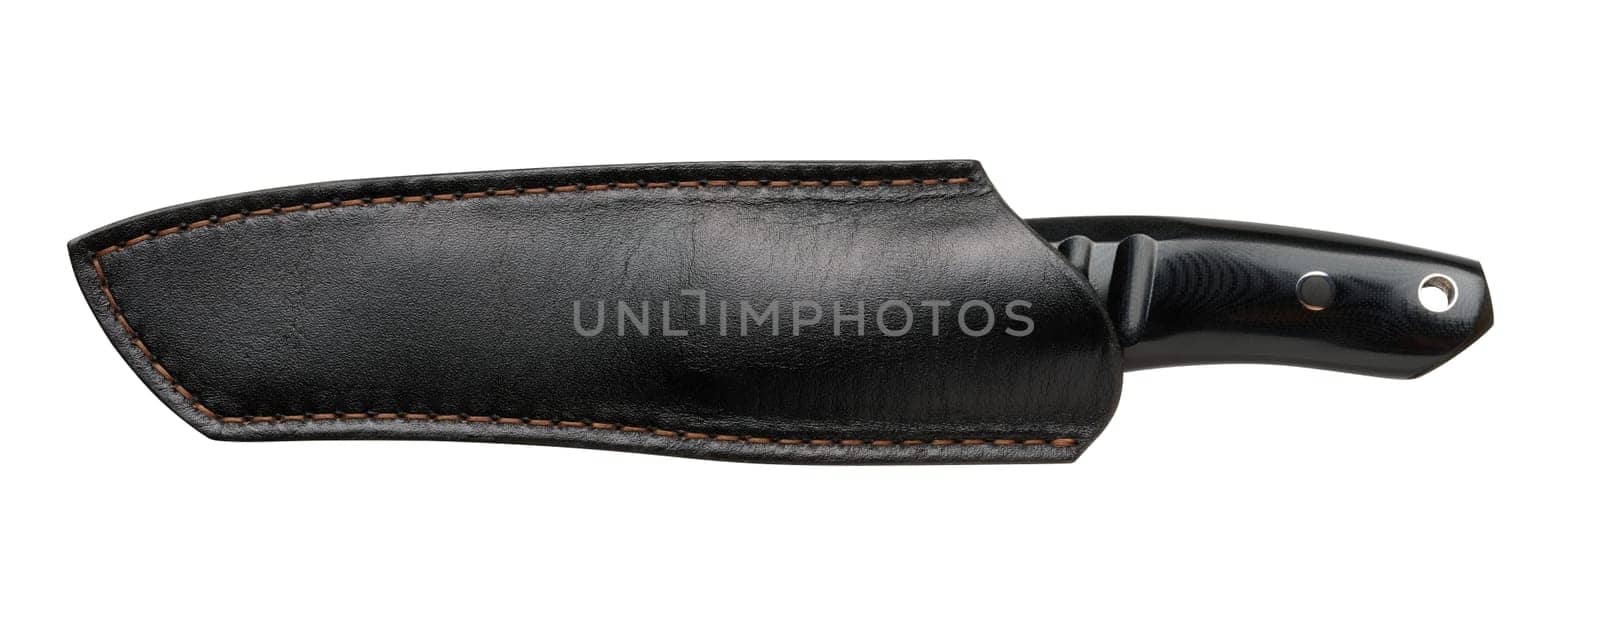 Tactical knife with a black handle in a leather case on an isolated background by ndanko